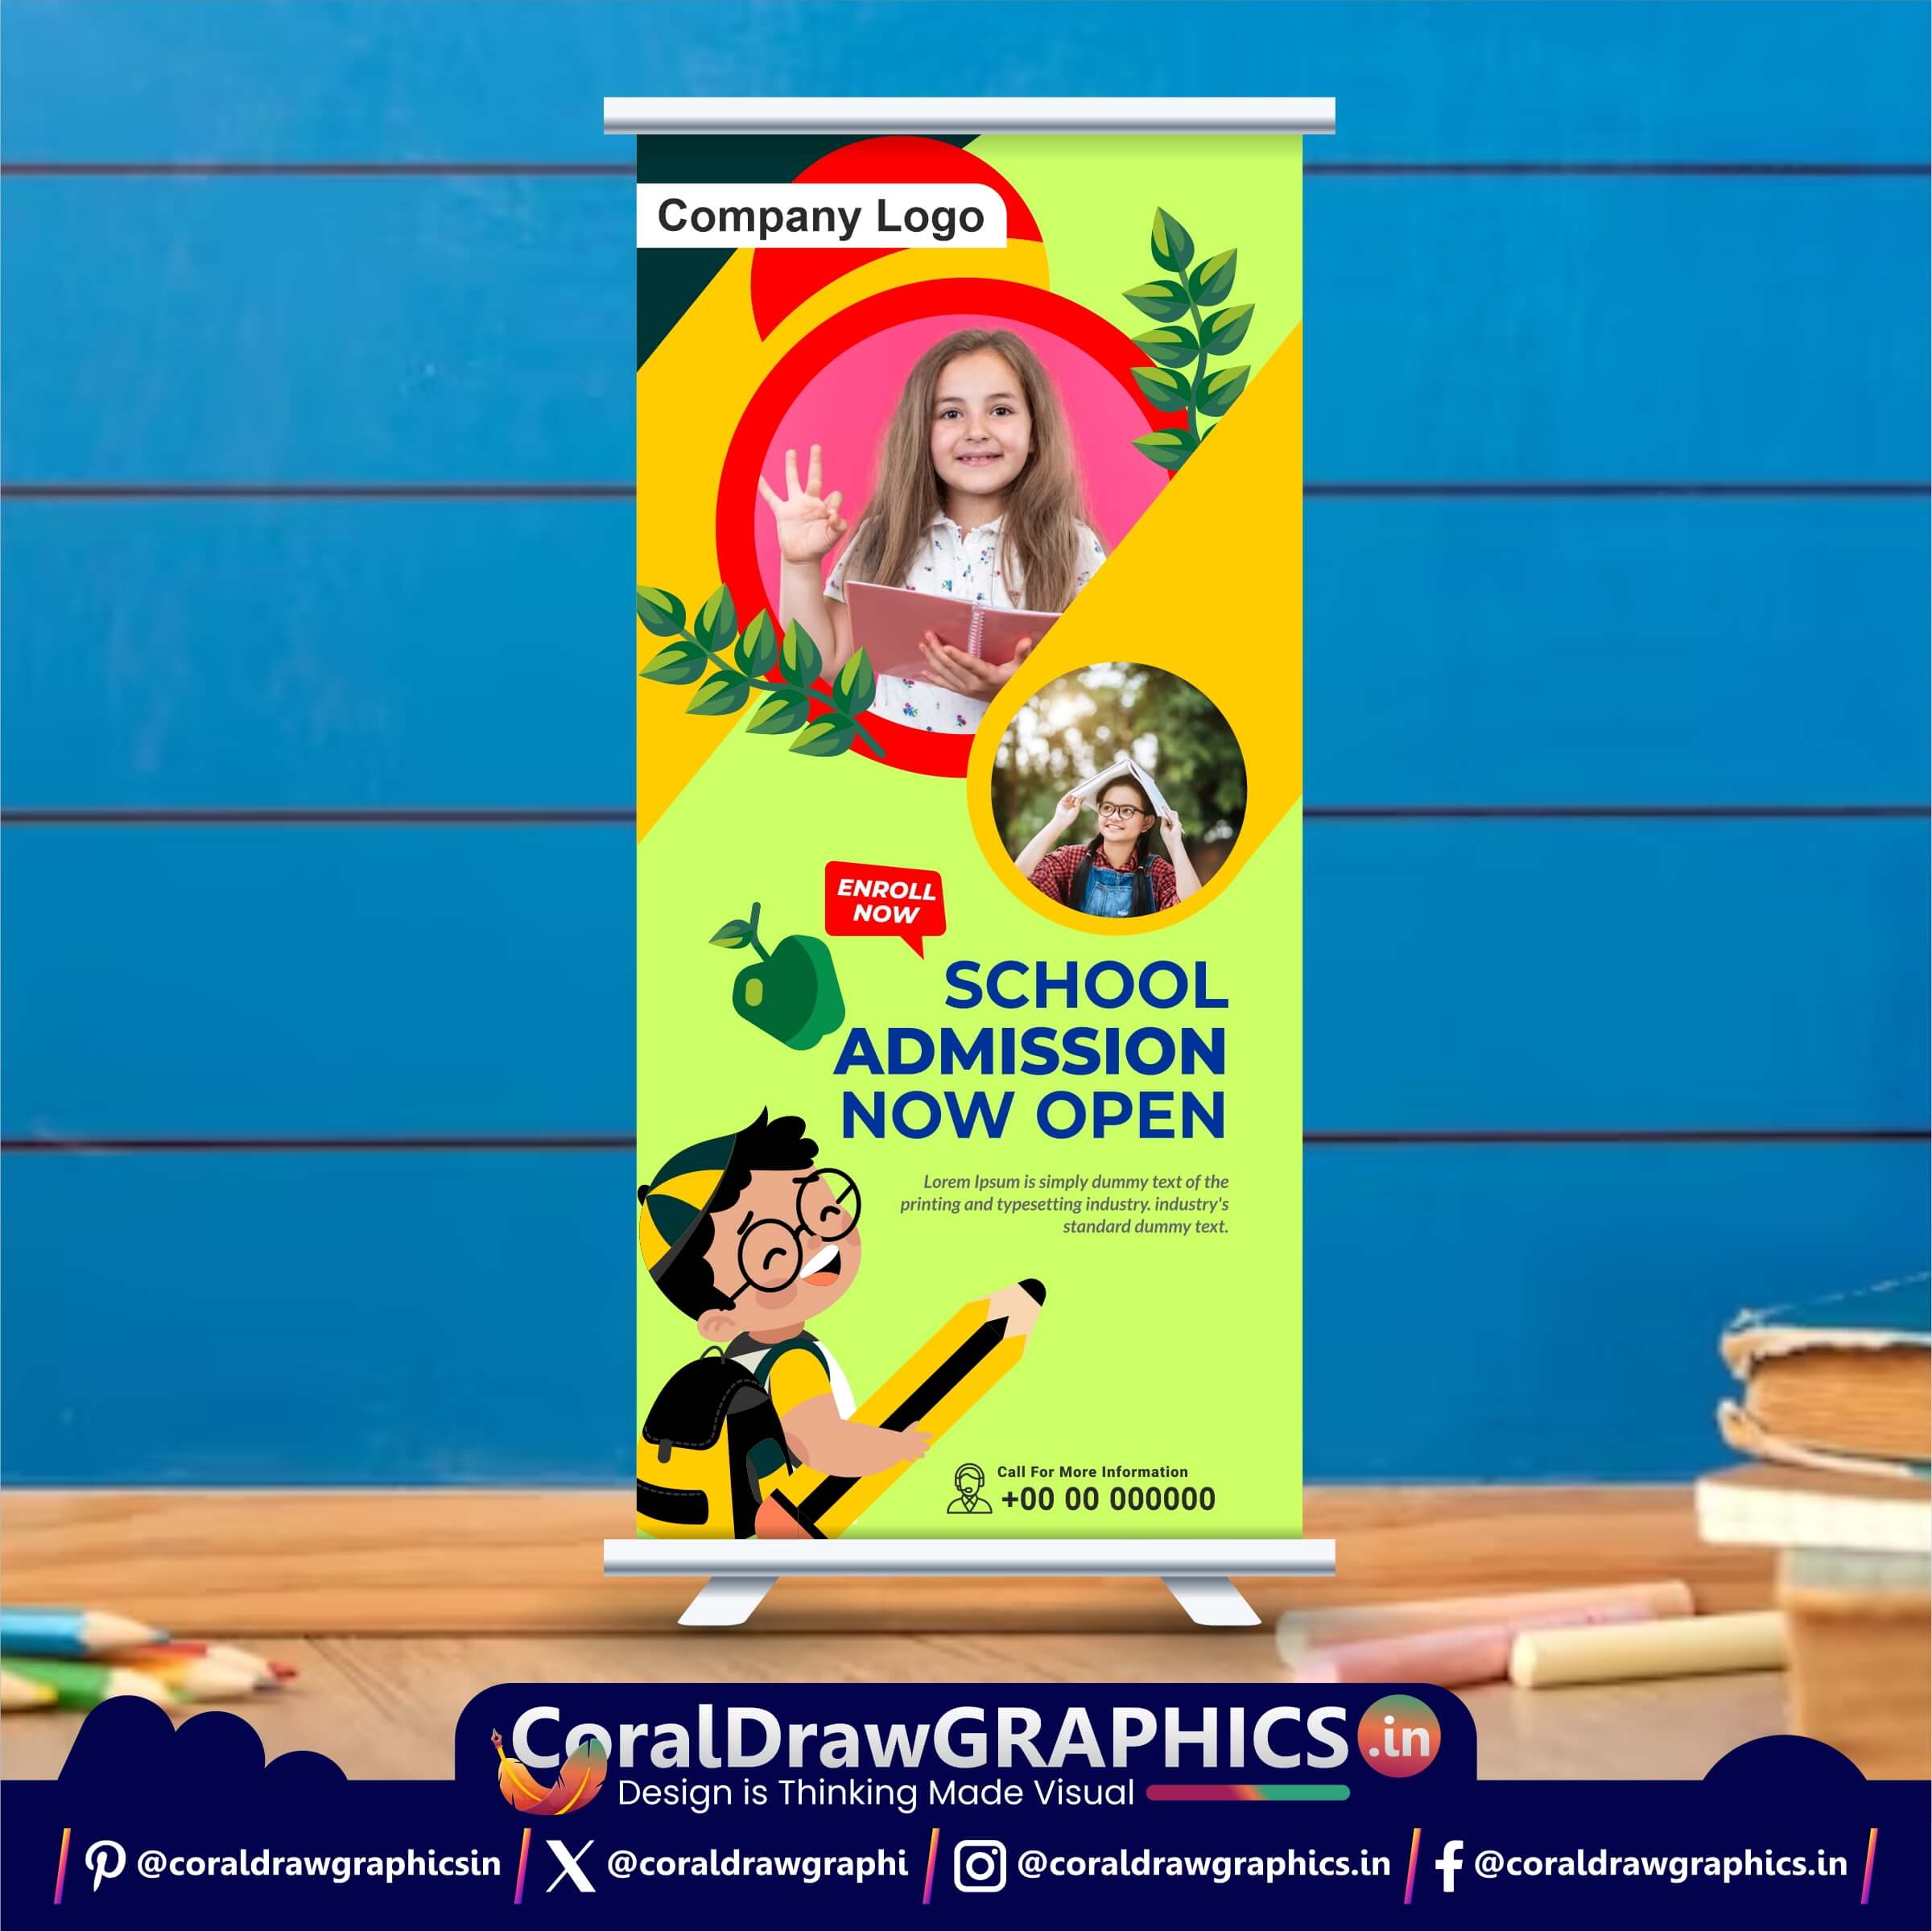 #SchoolAdmissions2024 🏫📚 #EnrollWithExcellence 🎓✨ #AdmissionOpenNow 📅🔓 #FutureLeadersInMaking 🌟👧👦 #ApplyTodaySucceedTomorrow 📝🌈 #EducateInnovateInspire 🌐🚀 #UnlockYourPotential 🗝️🧠 #AdmissionAlert2024 🚨📢 #SchoolOfPossibilities 🌟🏫 #LearnDreamGrow 📚🌱 #JoinUsForSuccess 🤝🌐 #AdmissionsInProgress 📈🔍 #BuildingBrightFutures ✨🏫 #QualityEducationForAll 🌐🎓 #AdmissionBannerDesign 🖌️🔗 #StaindeeTemplate 🎨💻